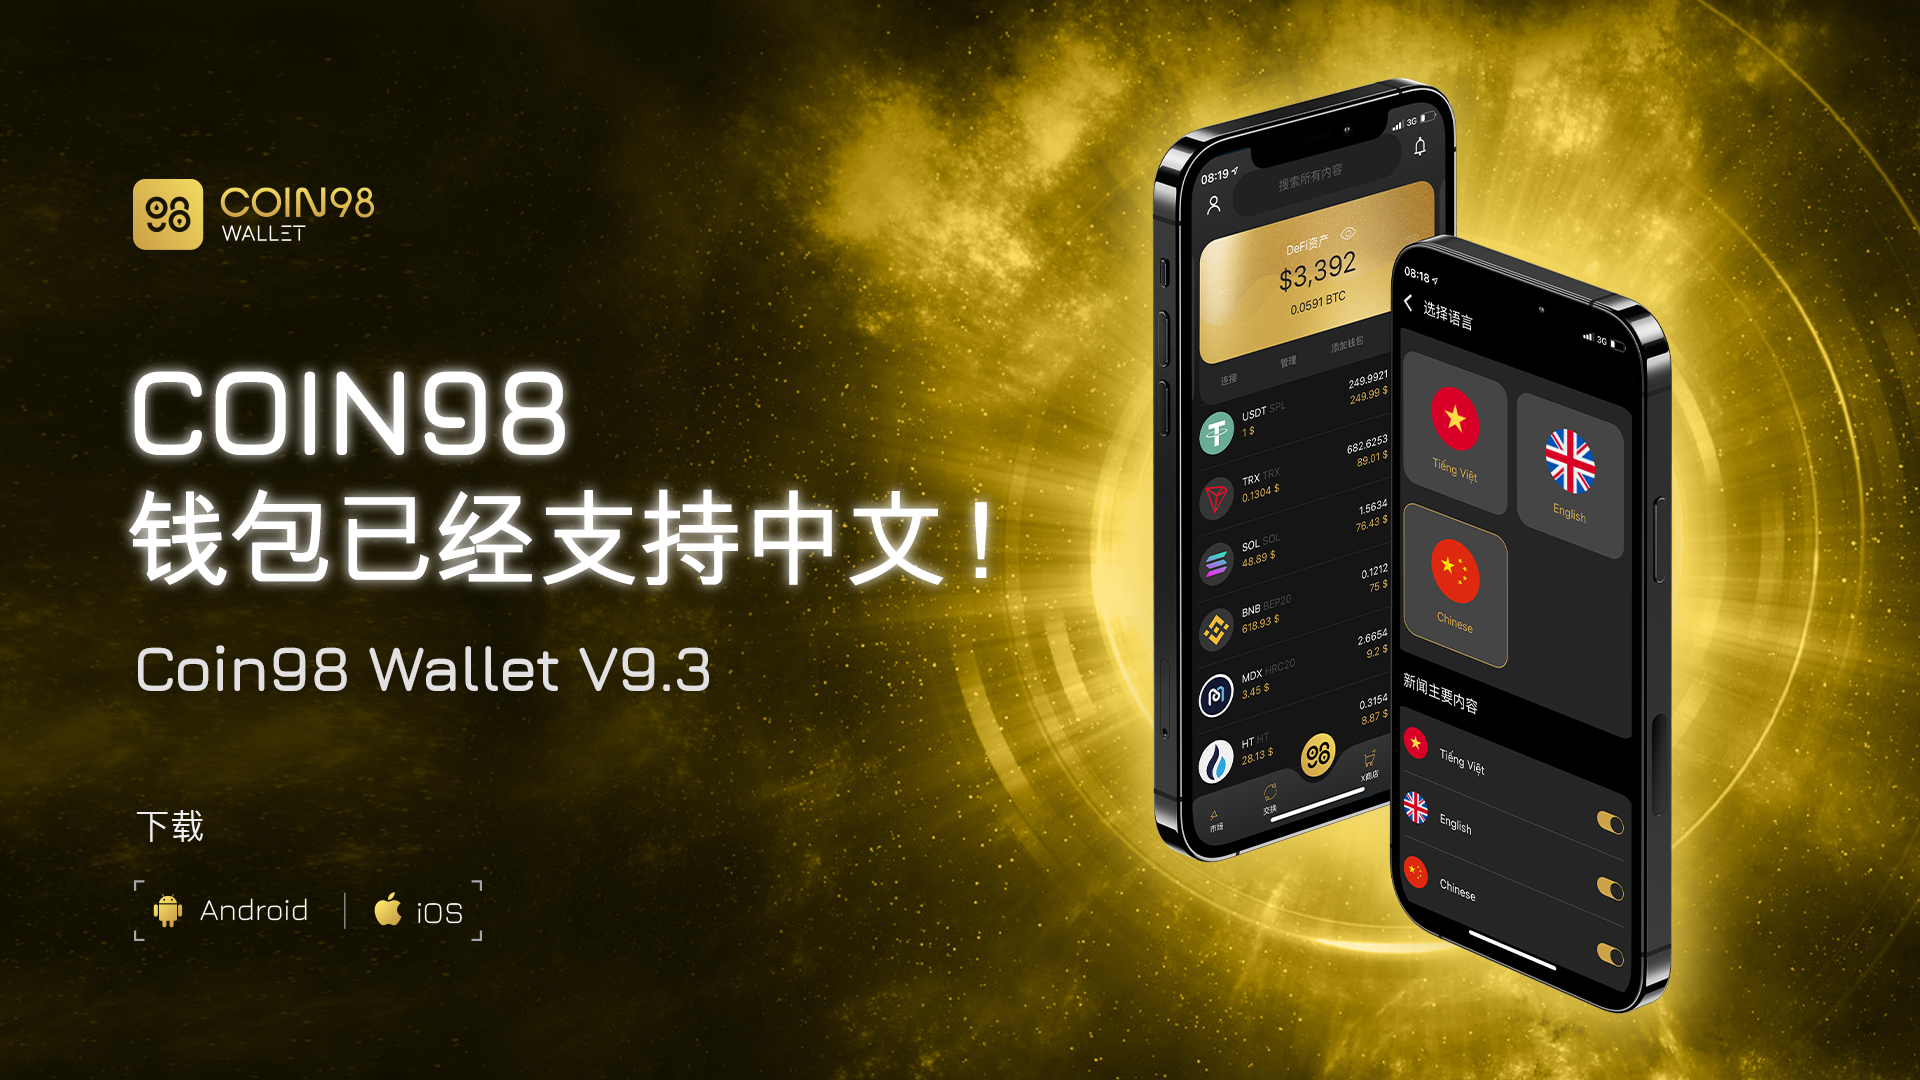 Coin98 Wallet now supports Simplified Chinese